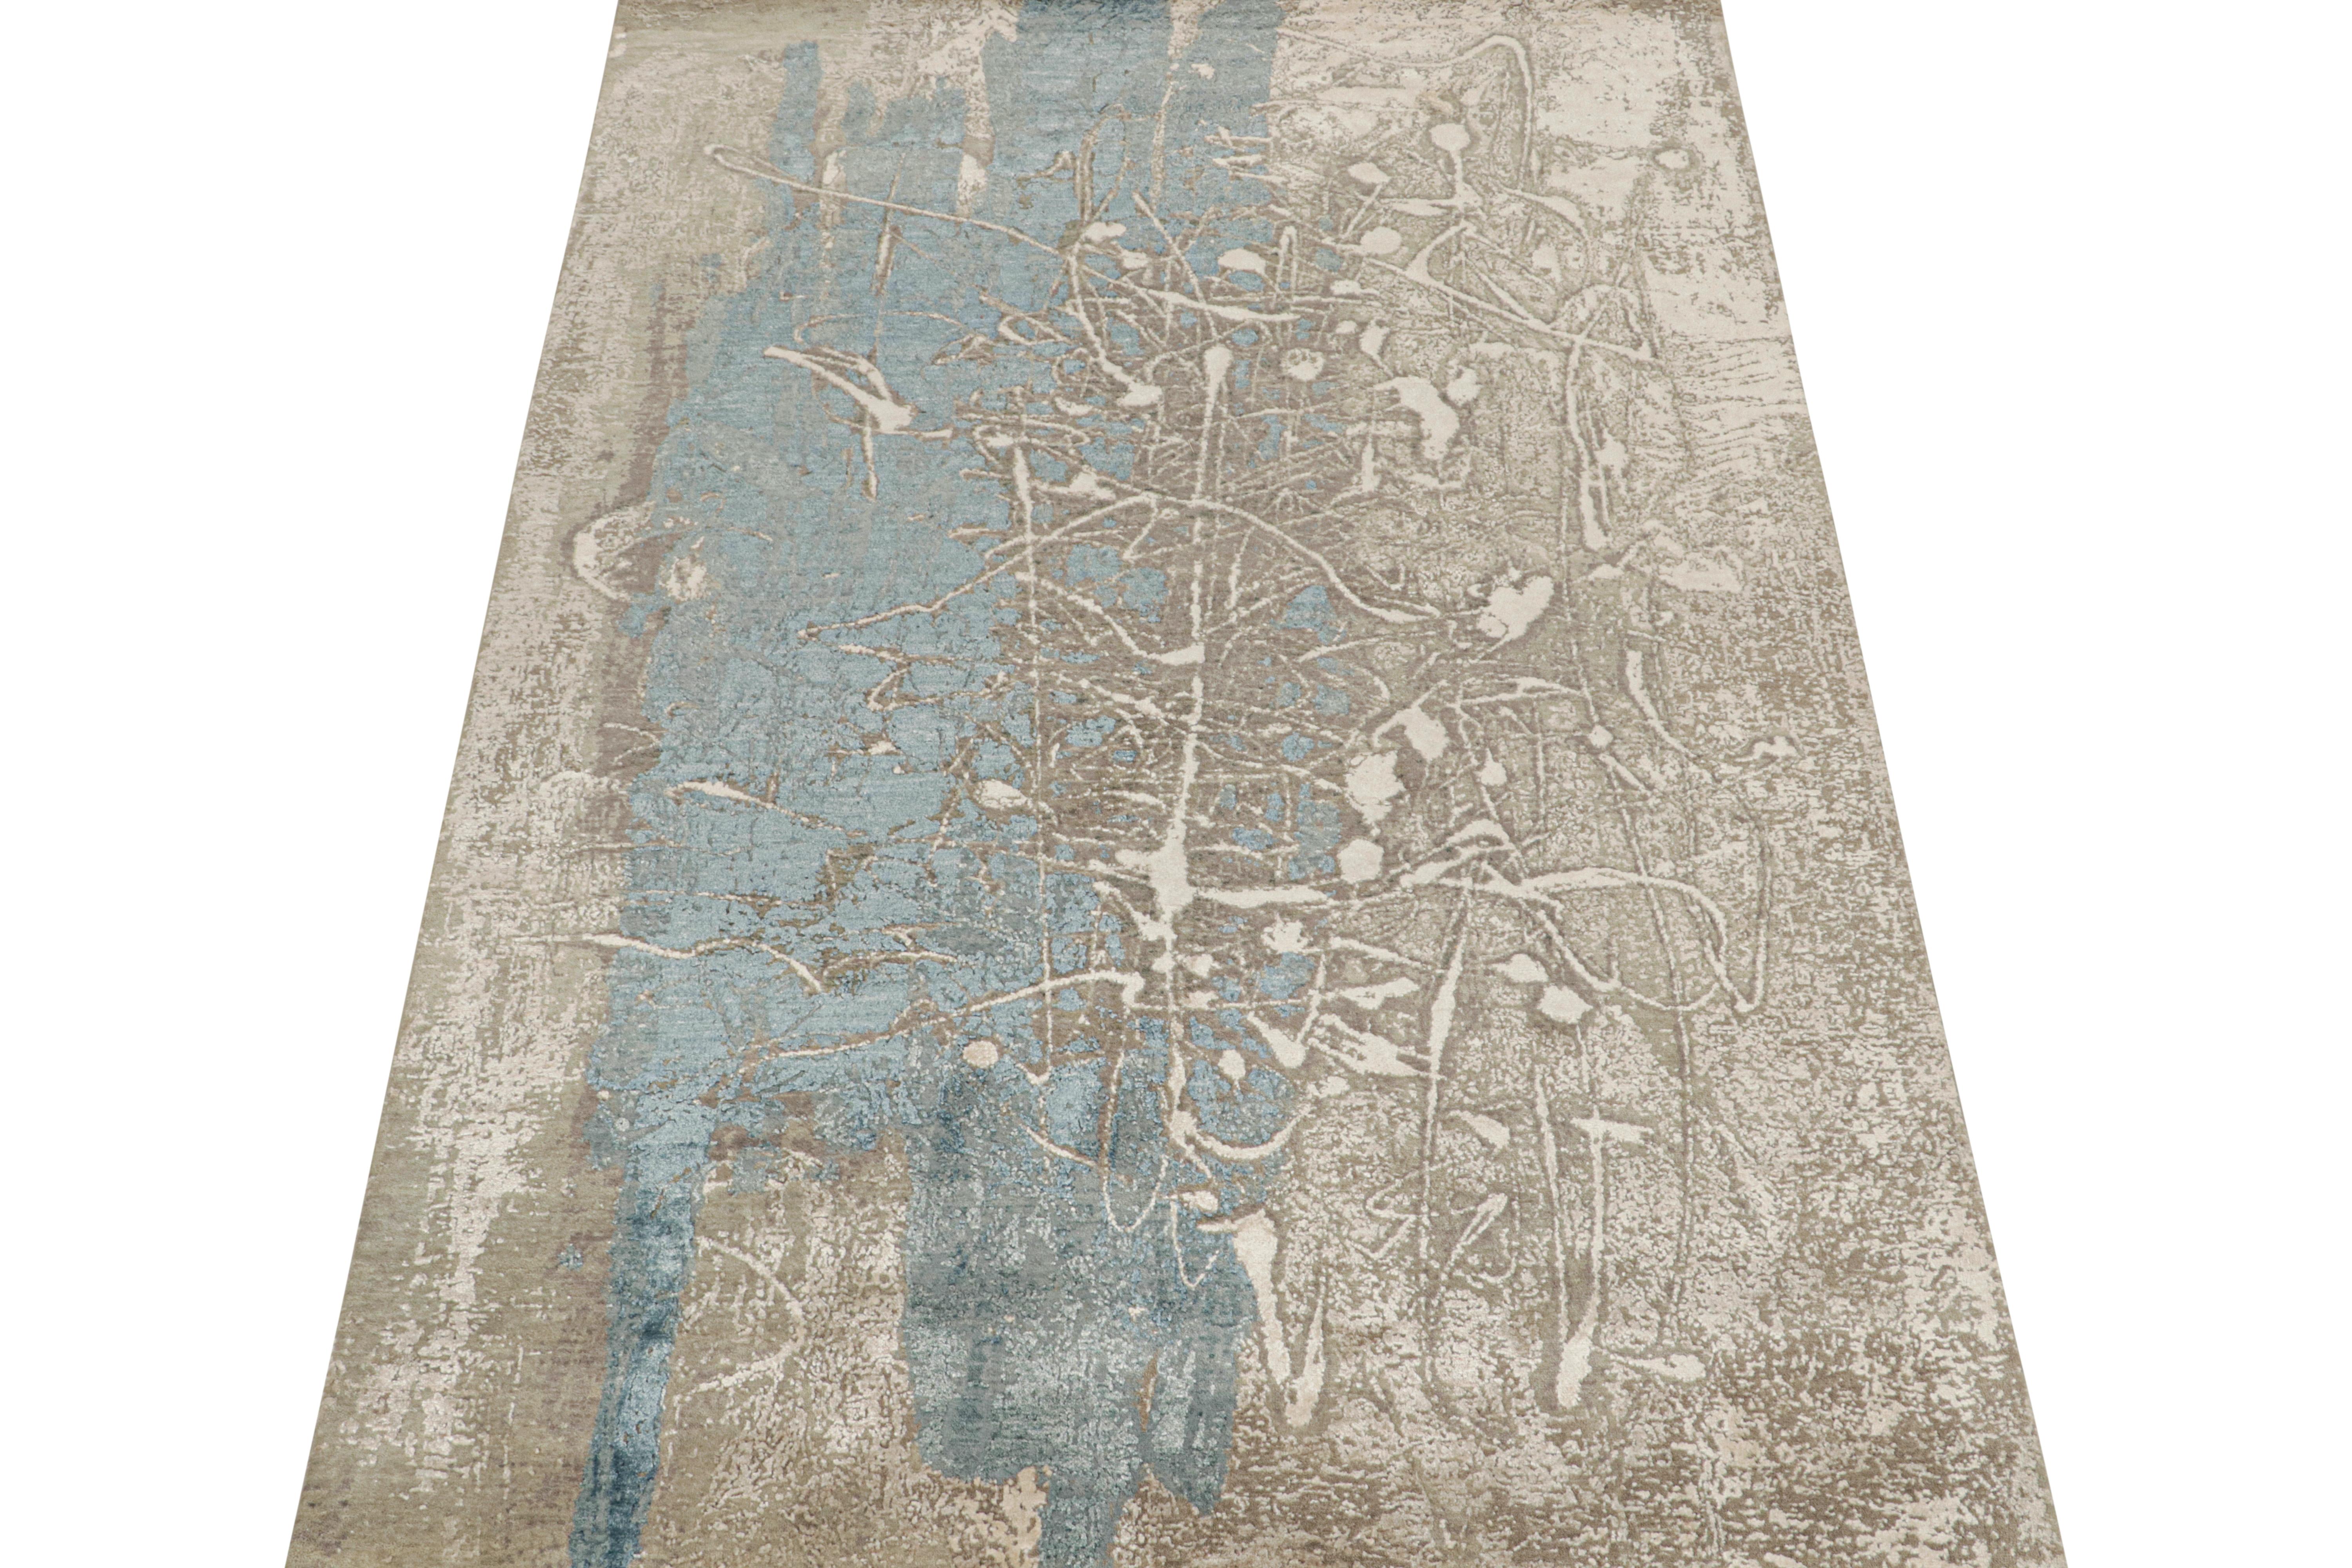 This 7x10 abstract rug is an exciting new addition to Rug & Kilim’s Modern rug collection. Hand-knotted in wool,cotton and silk, its design explores expressionist style in a bold new fashion and intricate quality.

This particular designer rugs